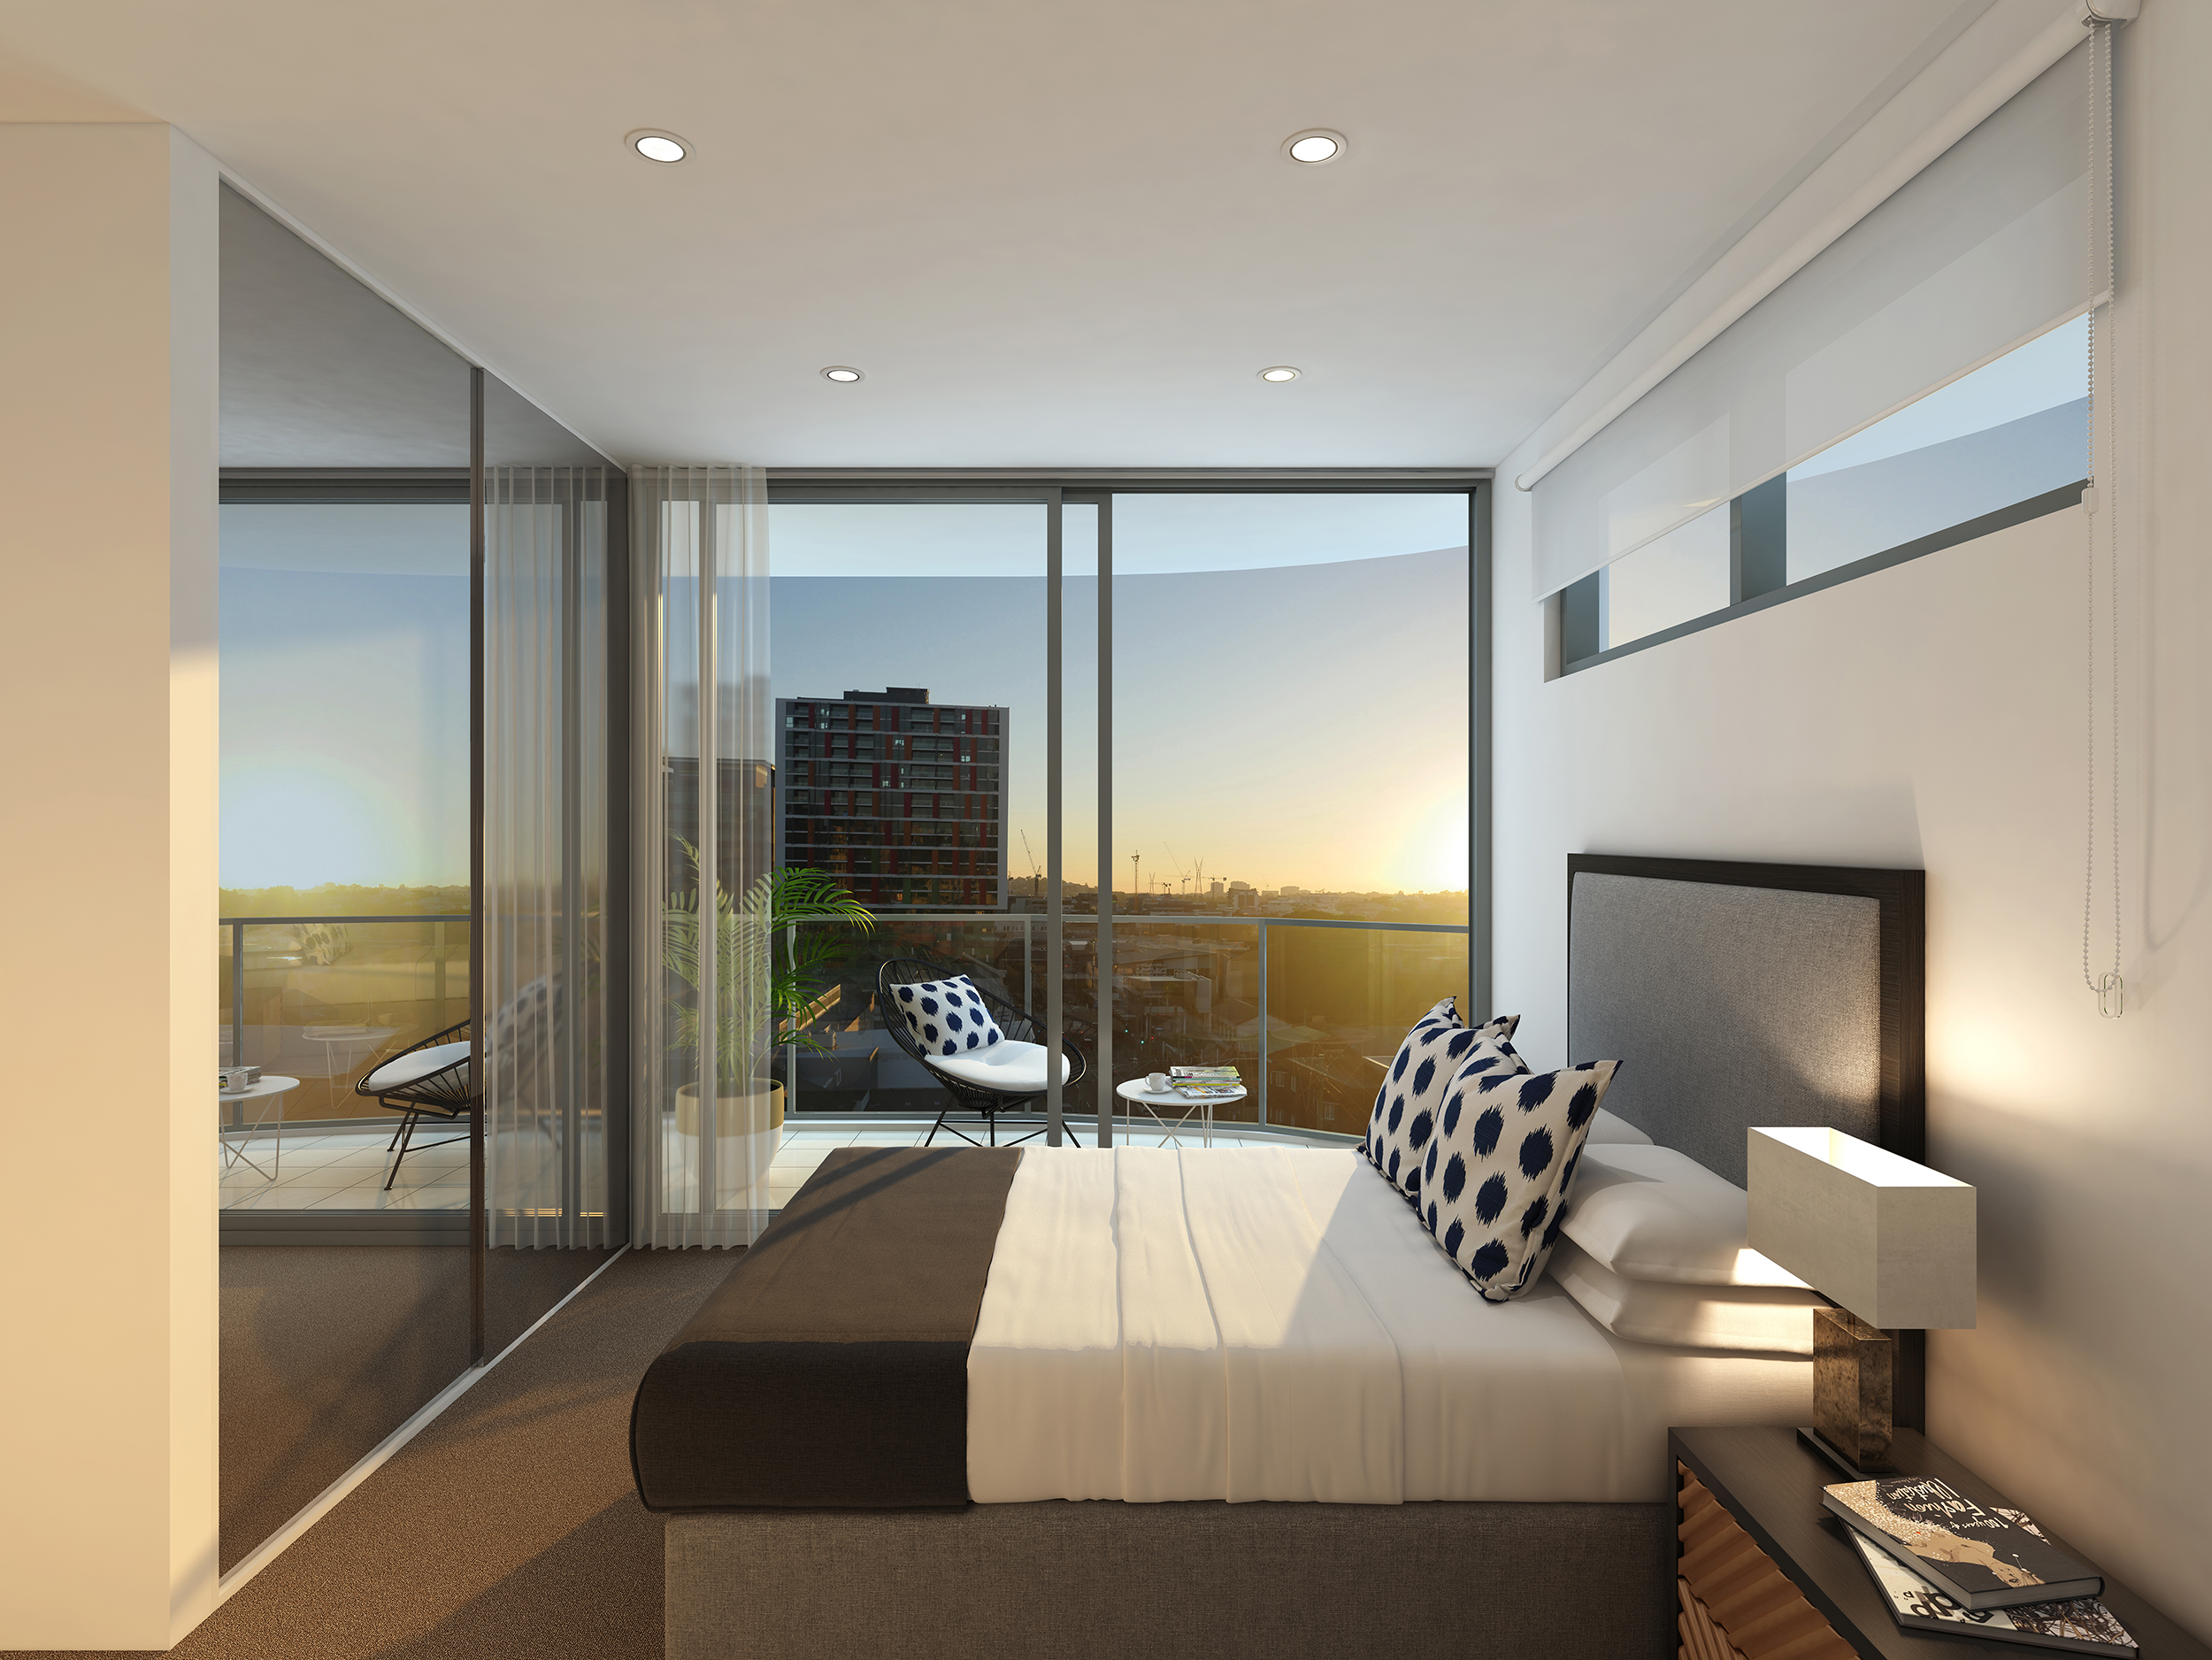 Bedroom suite of the winn with floor to ceiling glazing and a view out towards sunset